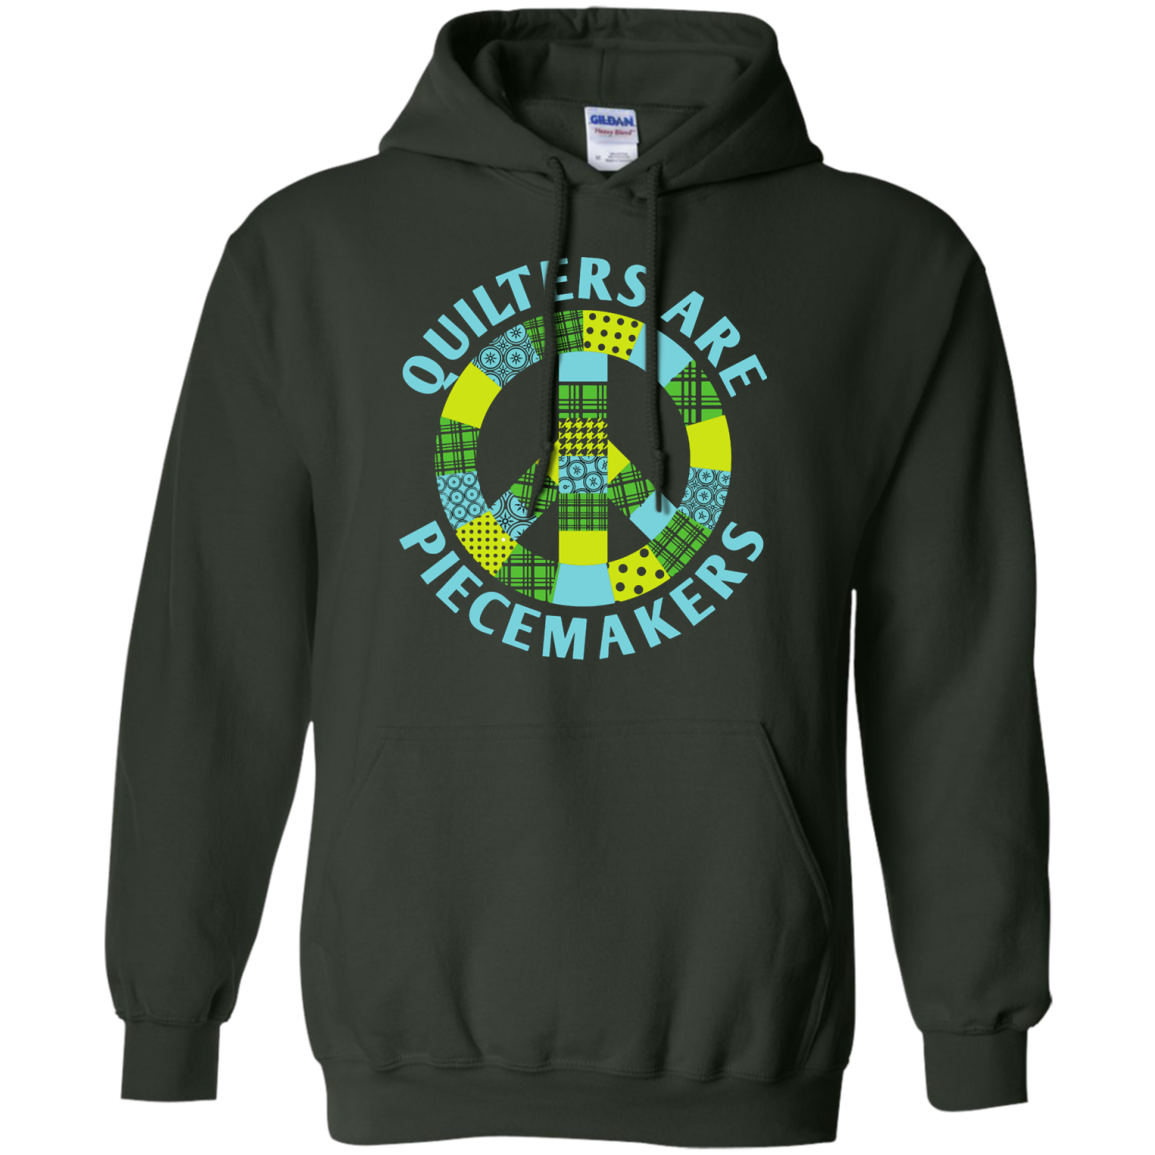 Quilters are Piecemakers Pullover Hoodies - Crafter4Life - 5